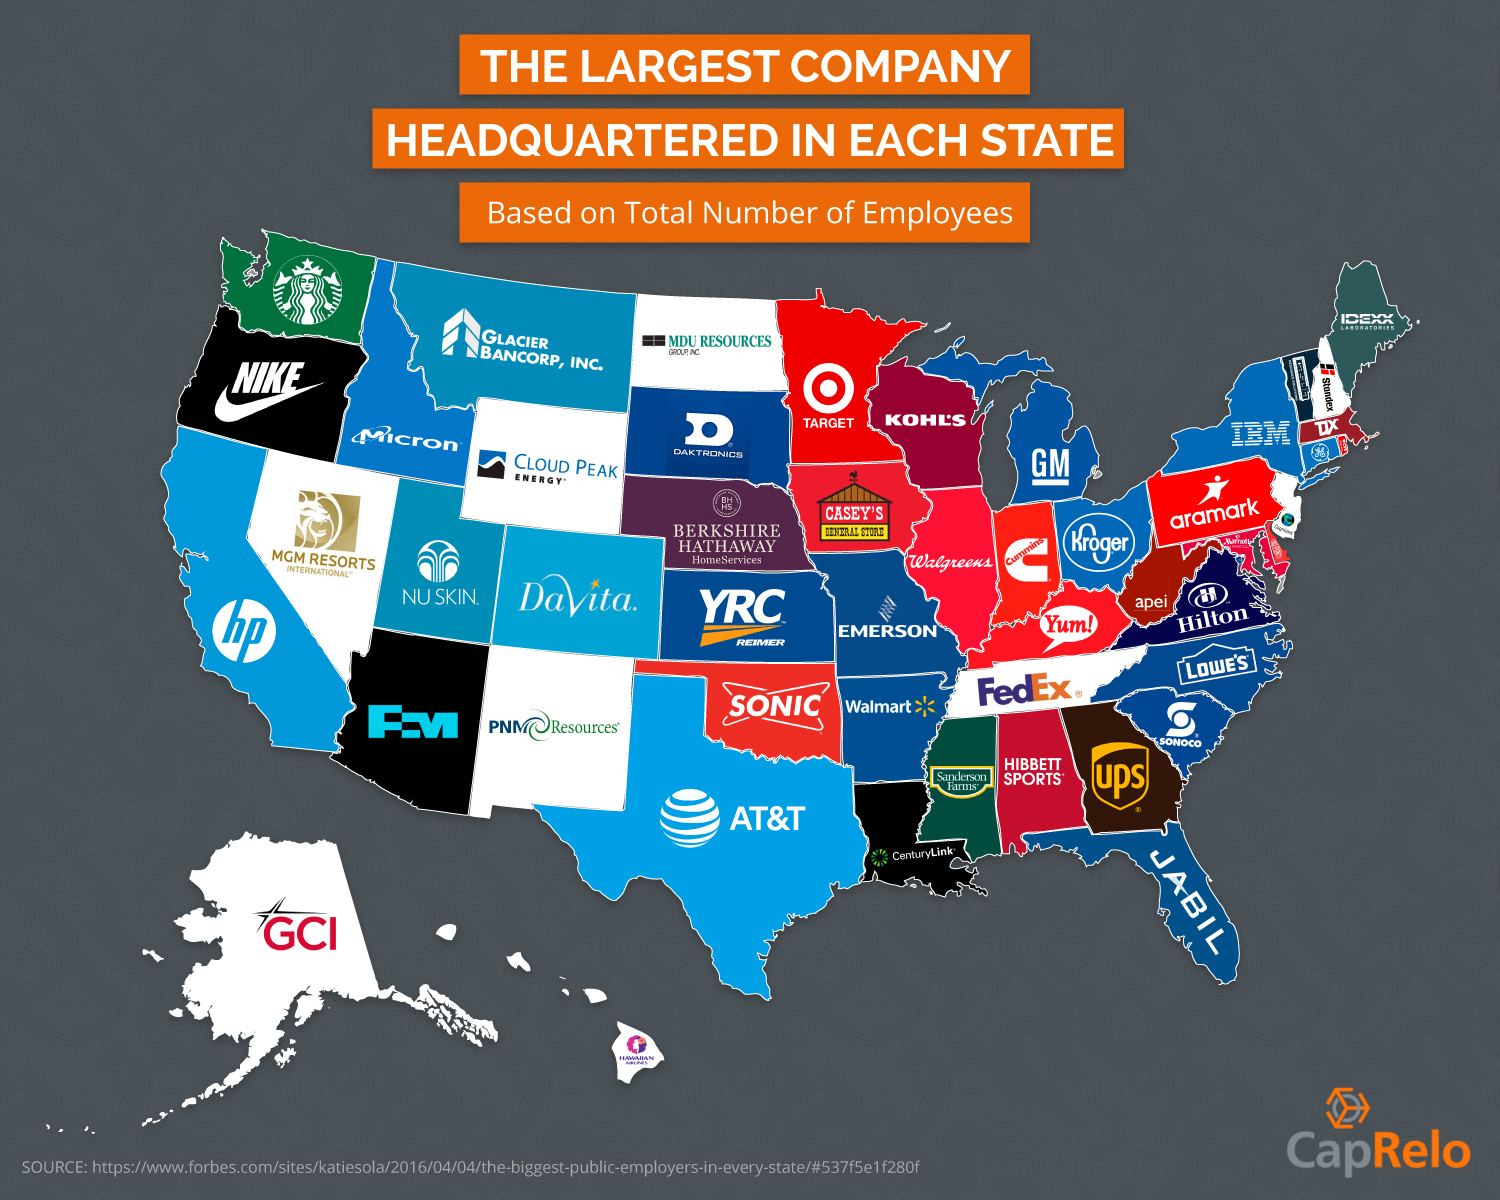 The largest company headquartered in each U.S. state - Vivid Maps